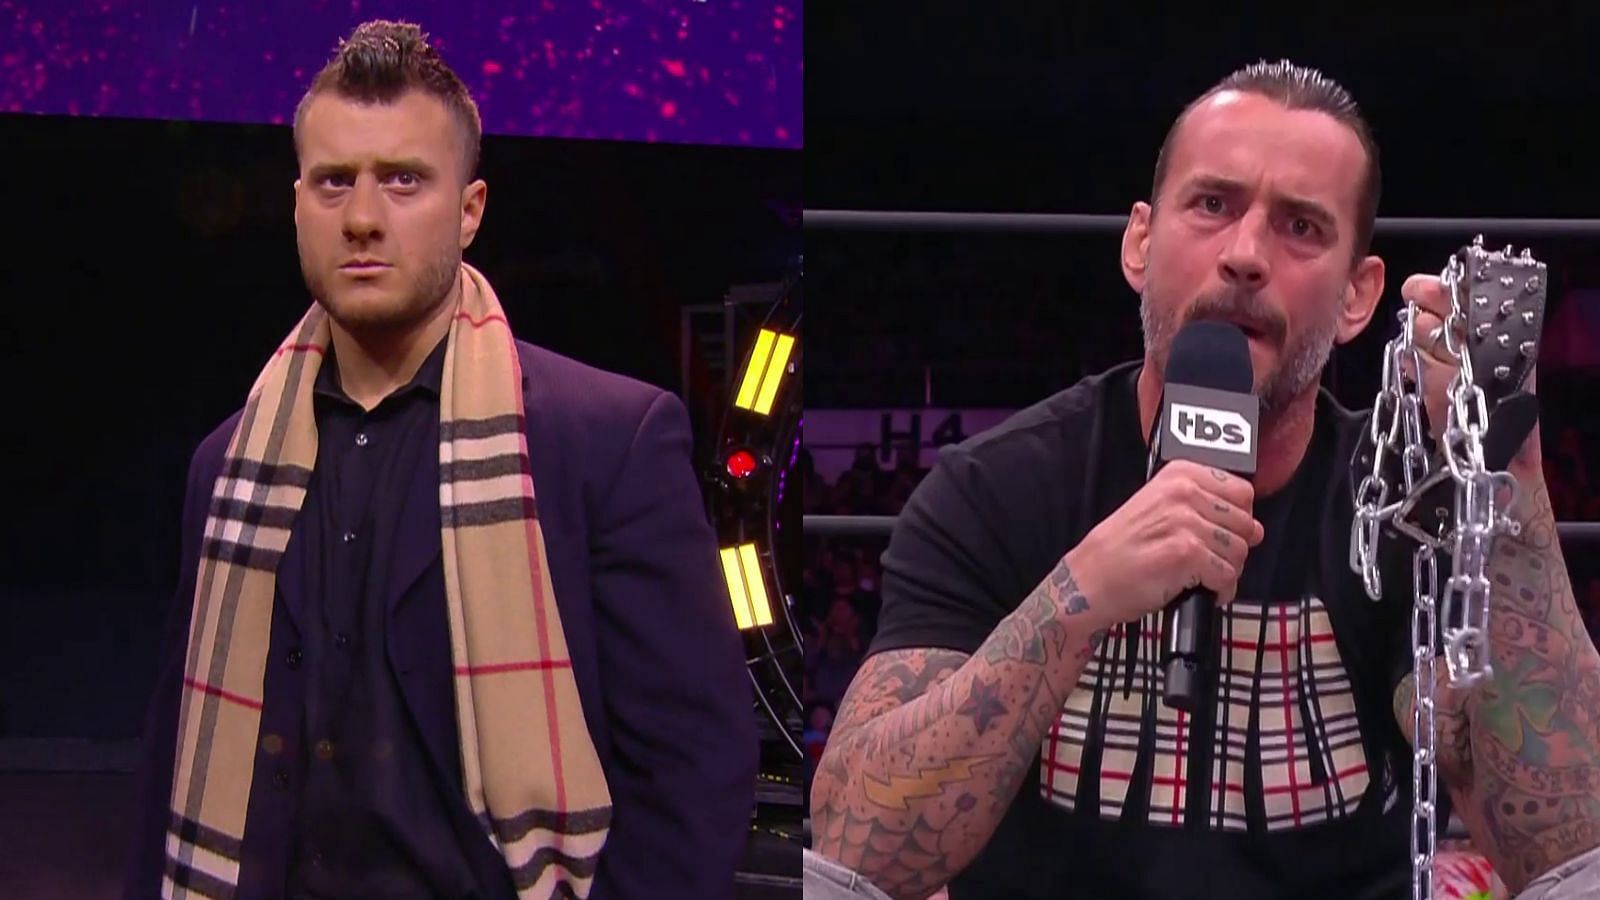 MJF and CM Punk will face each other at AEW Revolution.